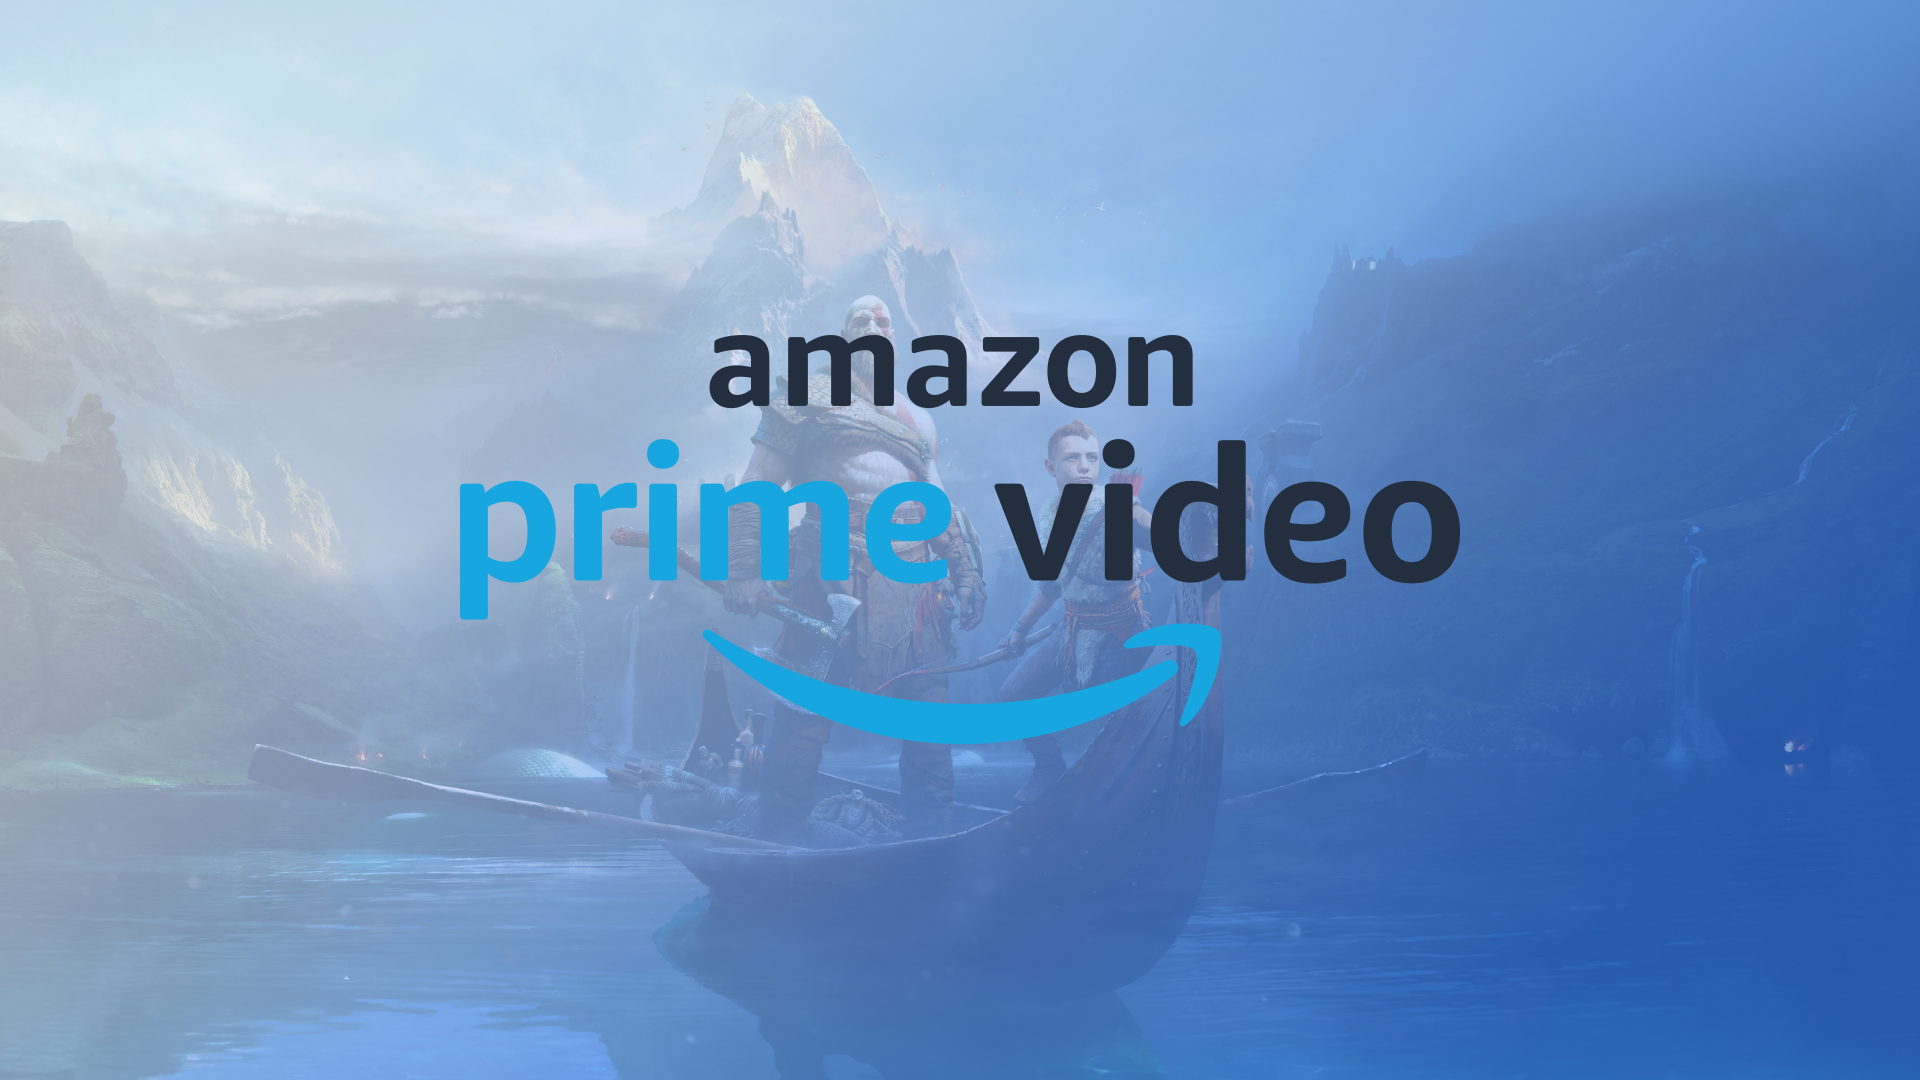 Amazon has announced a series based on God of War